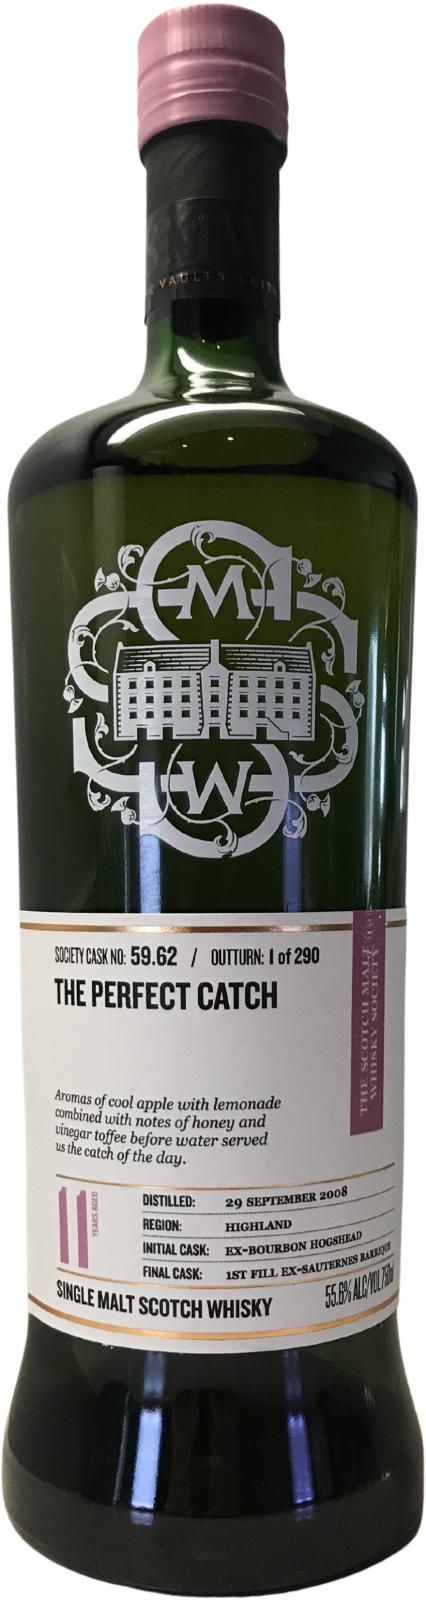 Teaninich 2008 SMWS 59.62 First Fill Sauternes Barrique 55.6% 750ml